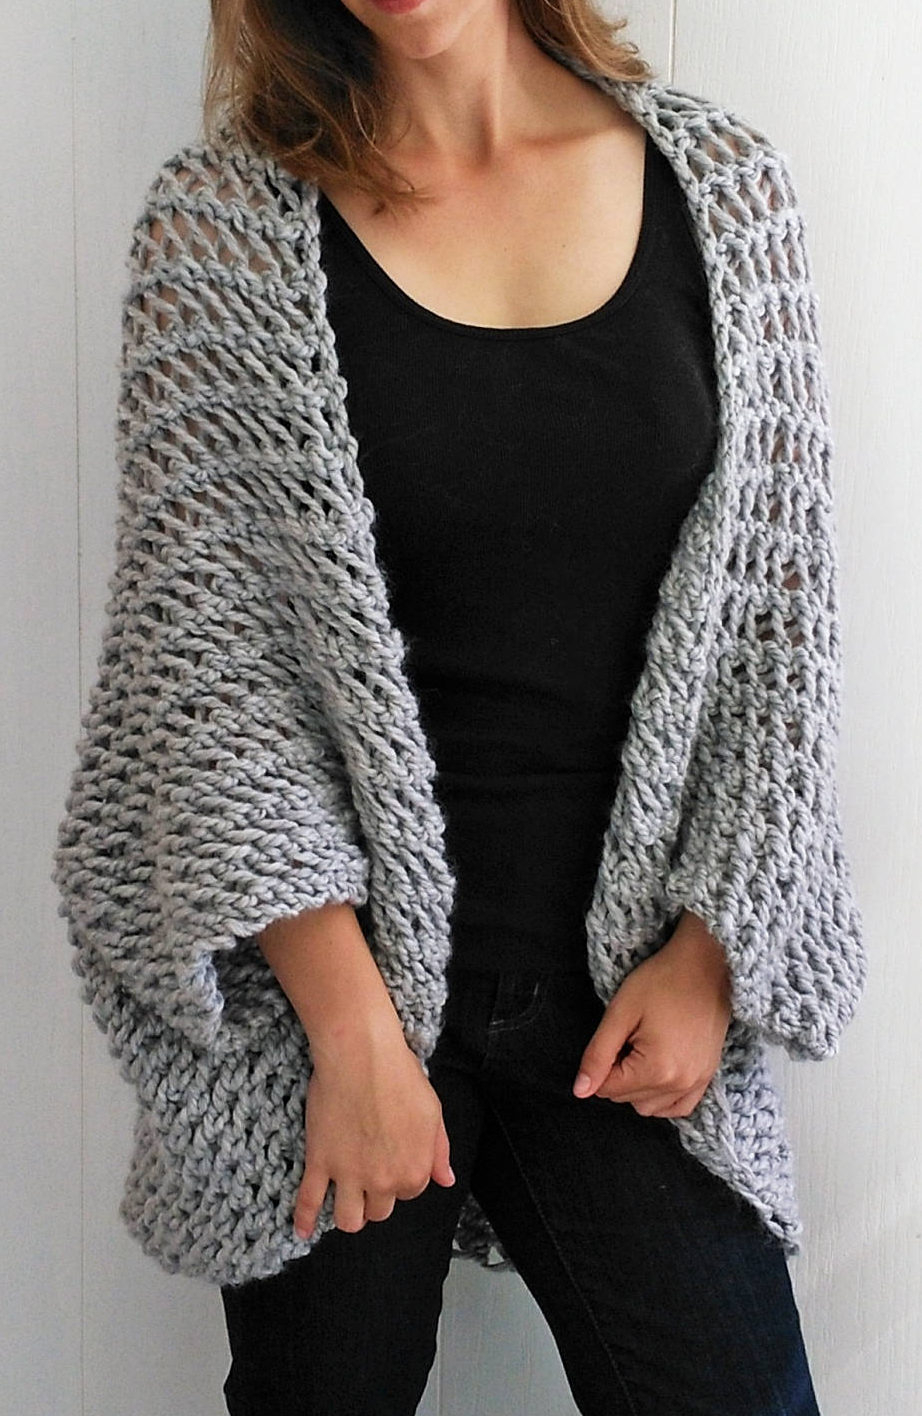 Free Sweater Patterns To Knit Easy Cardigan Knitting Patterns In The Loop Knitting